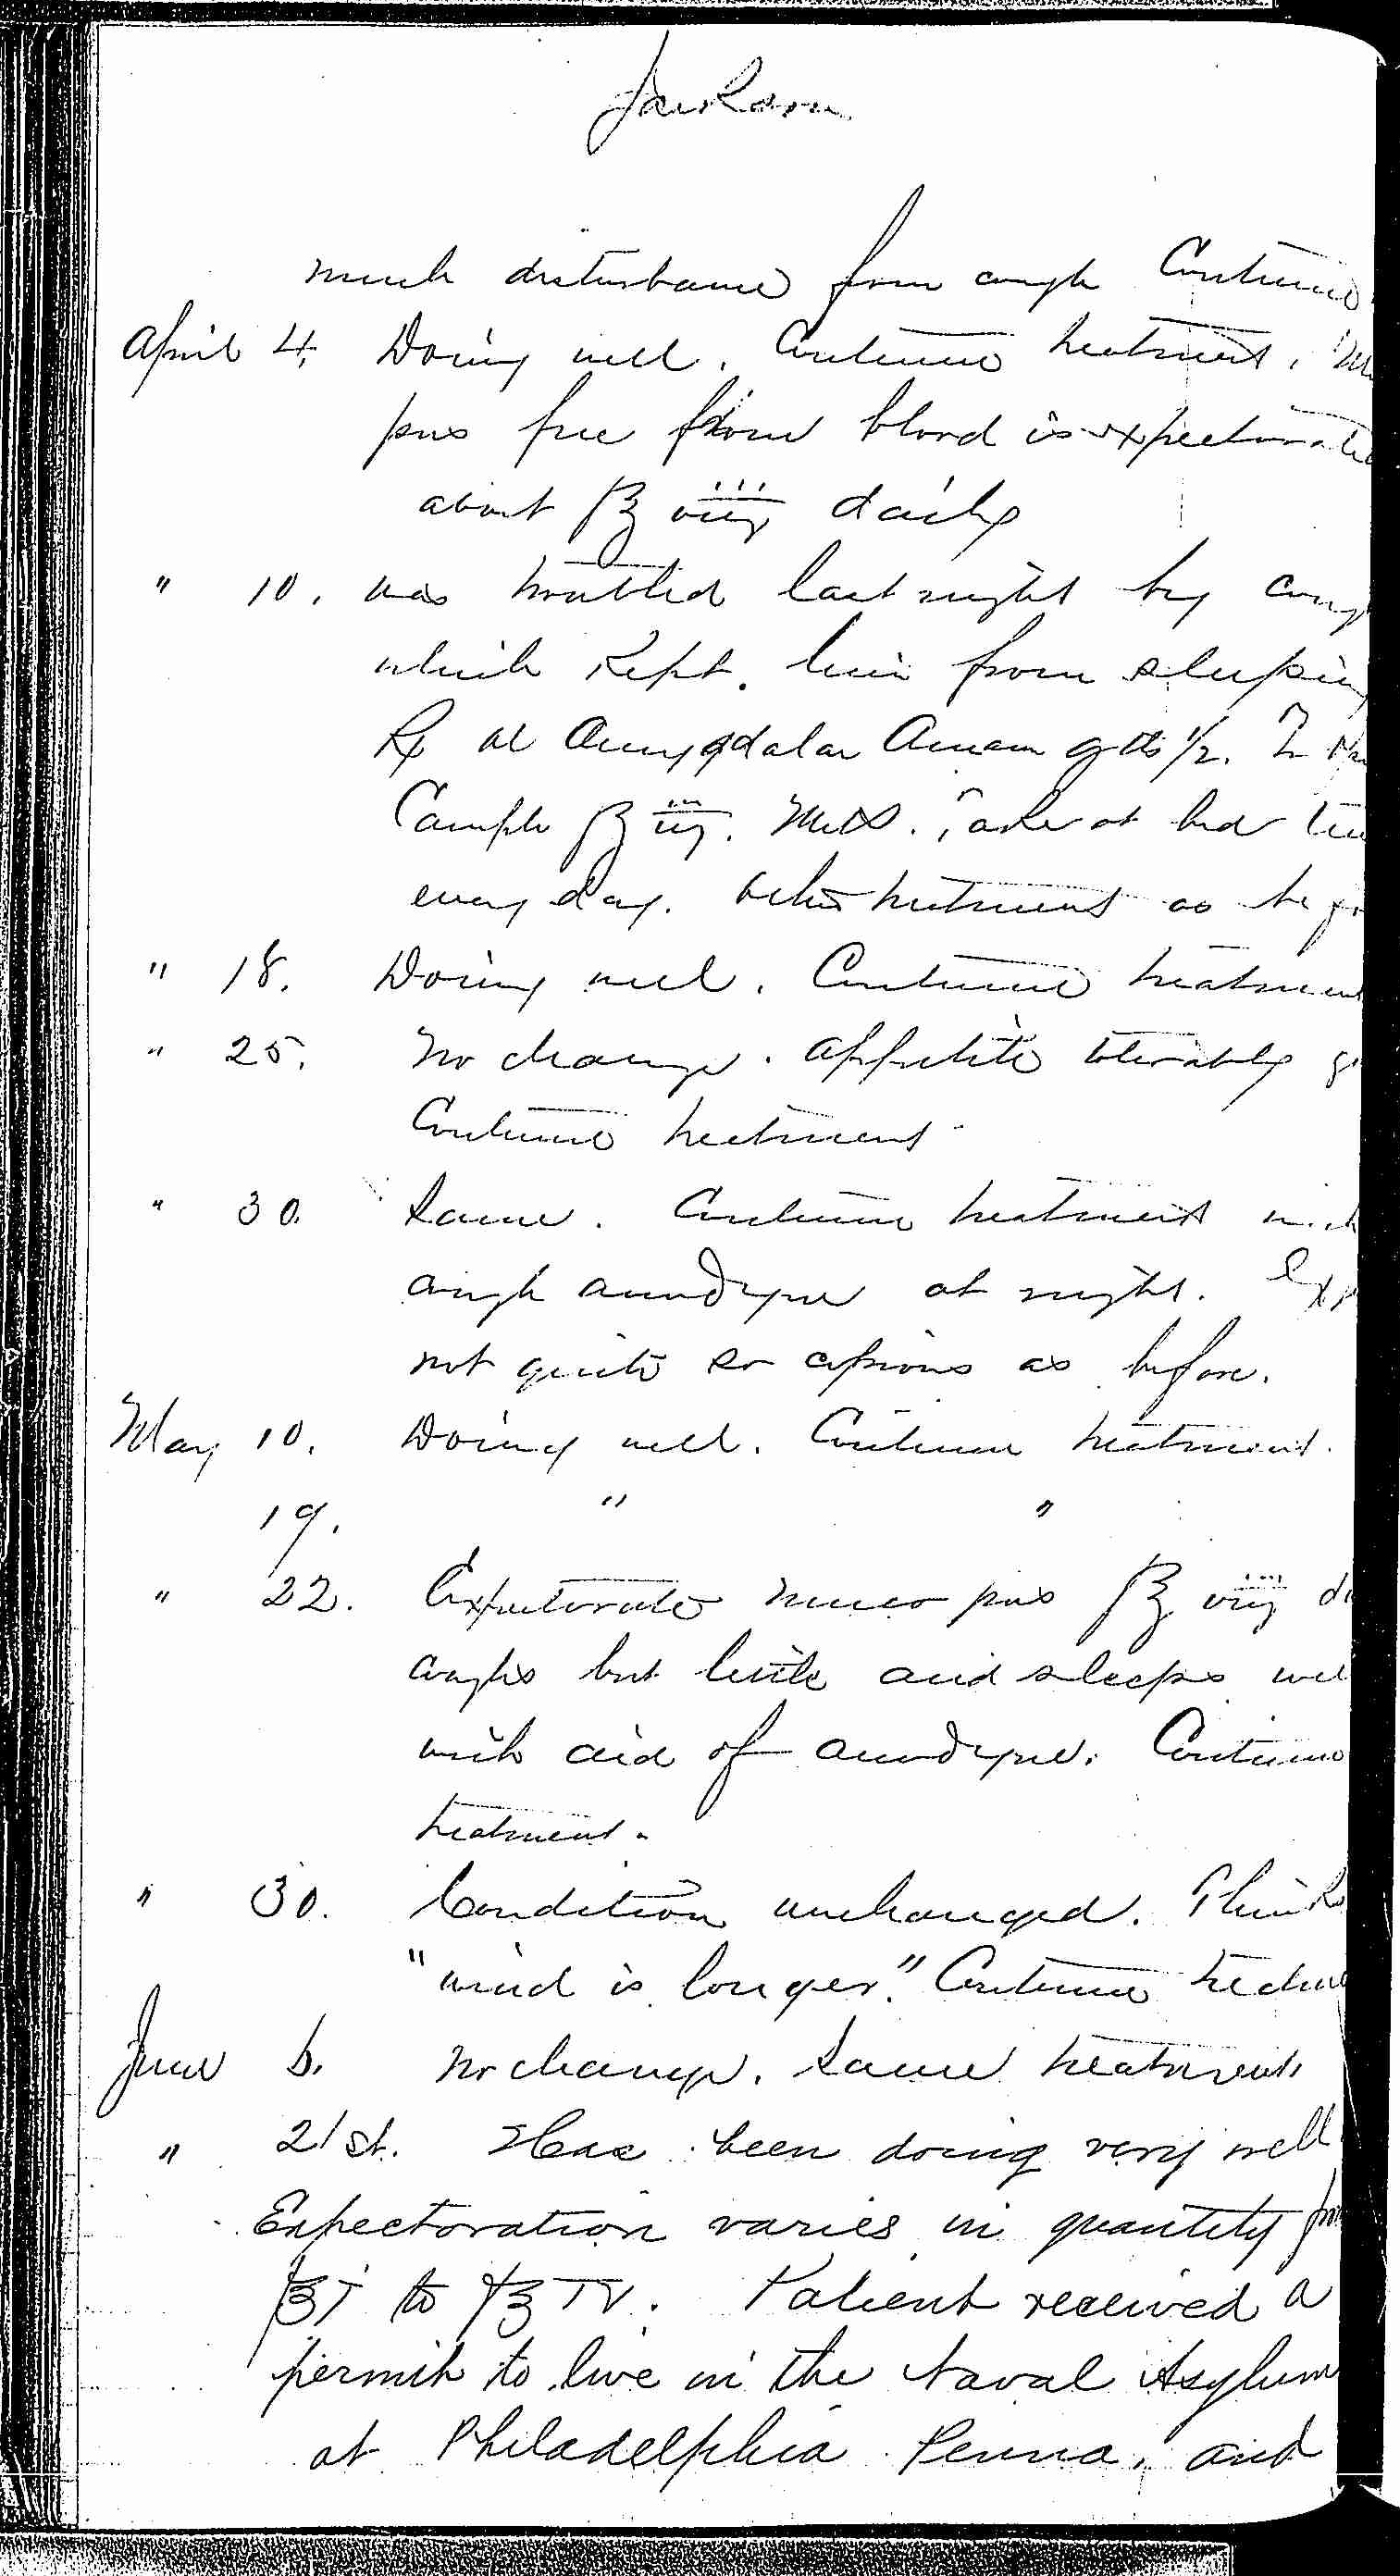 Entry for William Jackson (page 6 of 7) in the log Hospital Tickets and Case Papers - Naval Hospital - Washington, D.C. - 1868-69